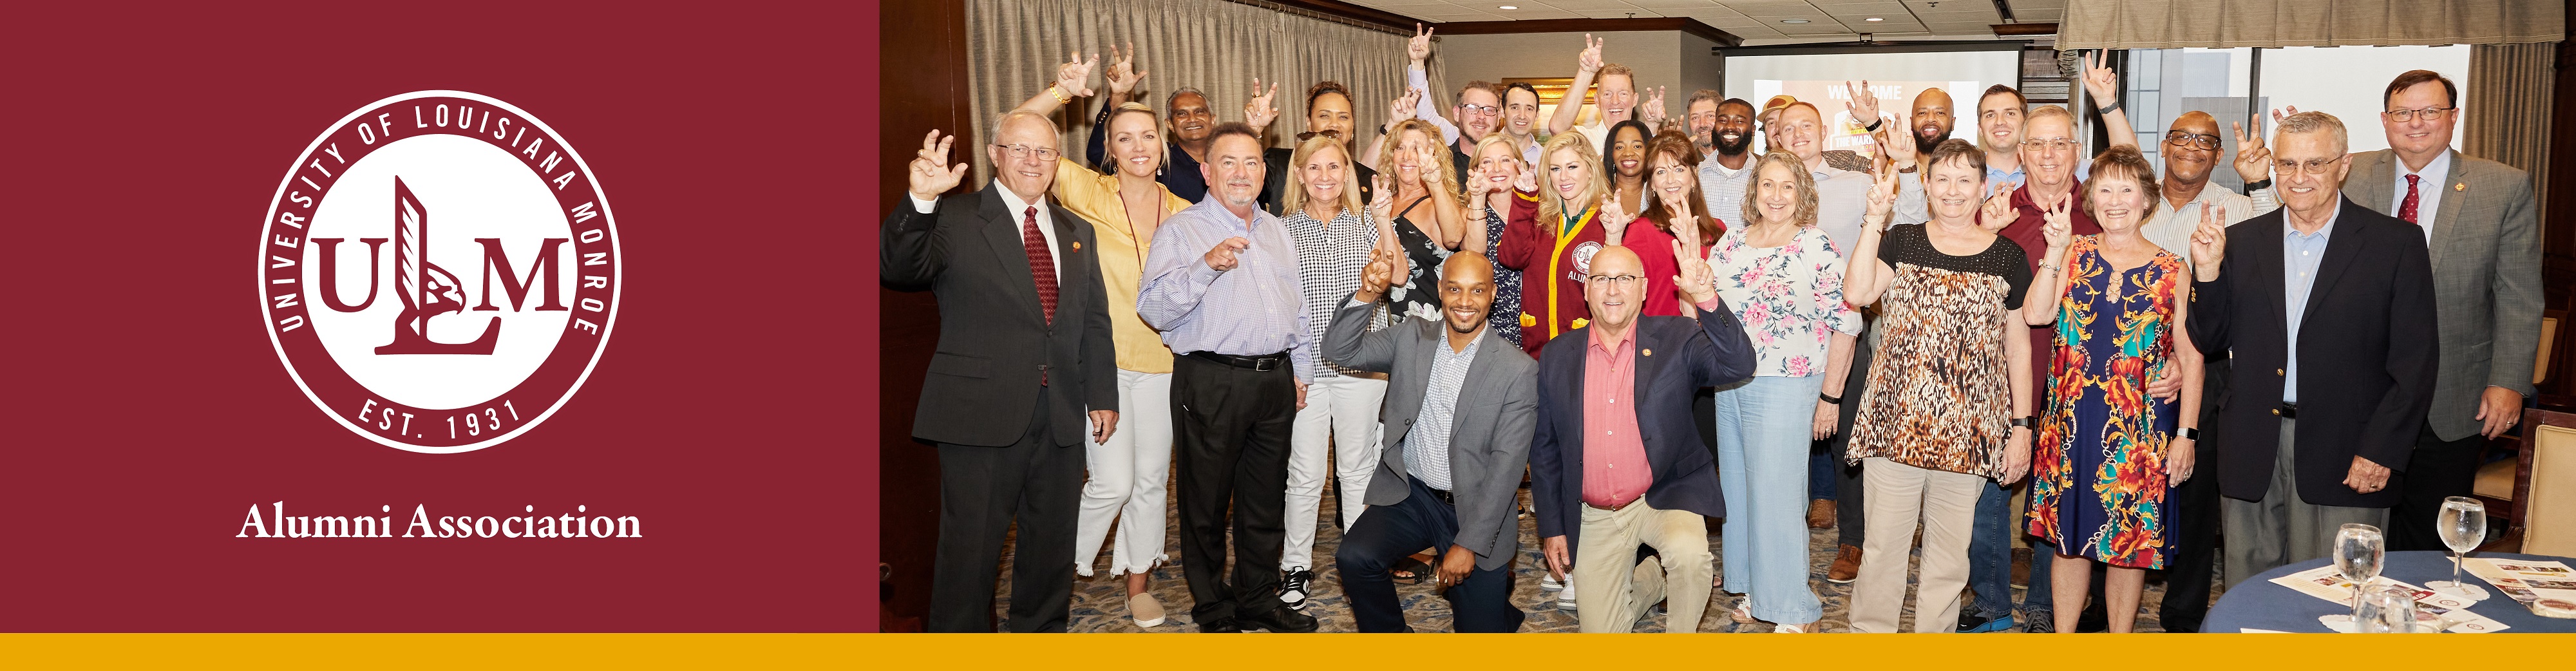 A group of people of all ages in business casual clothes smile at the camera and make the "Talons Out!" hand signal.